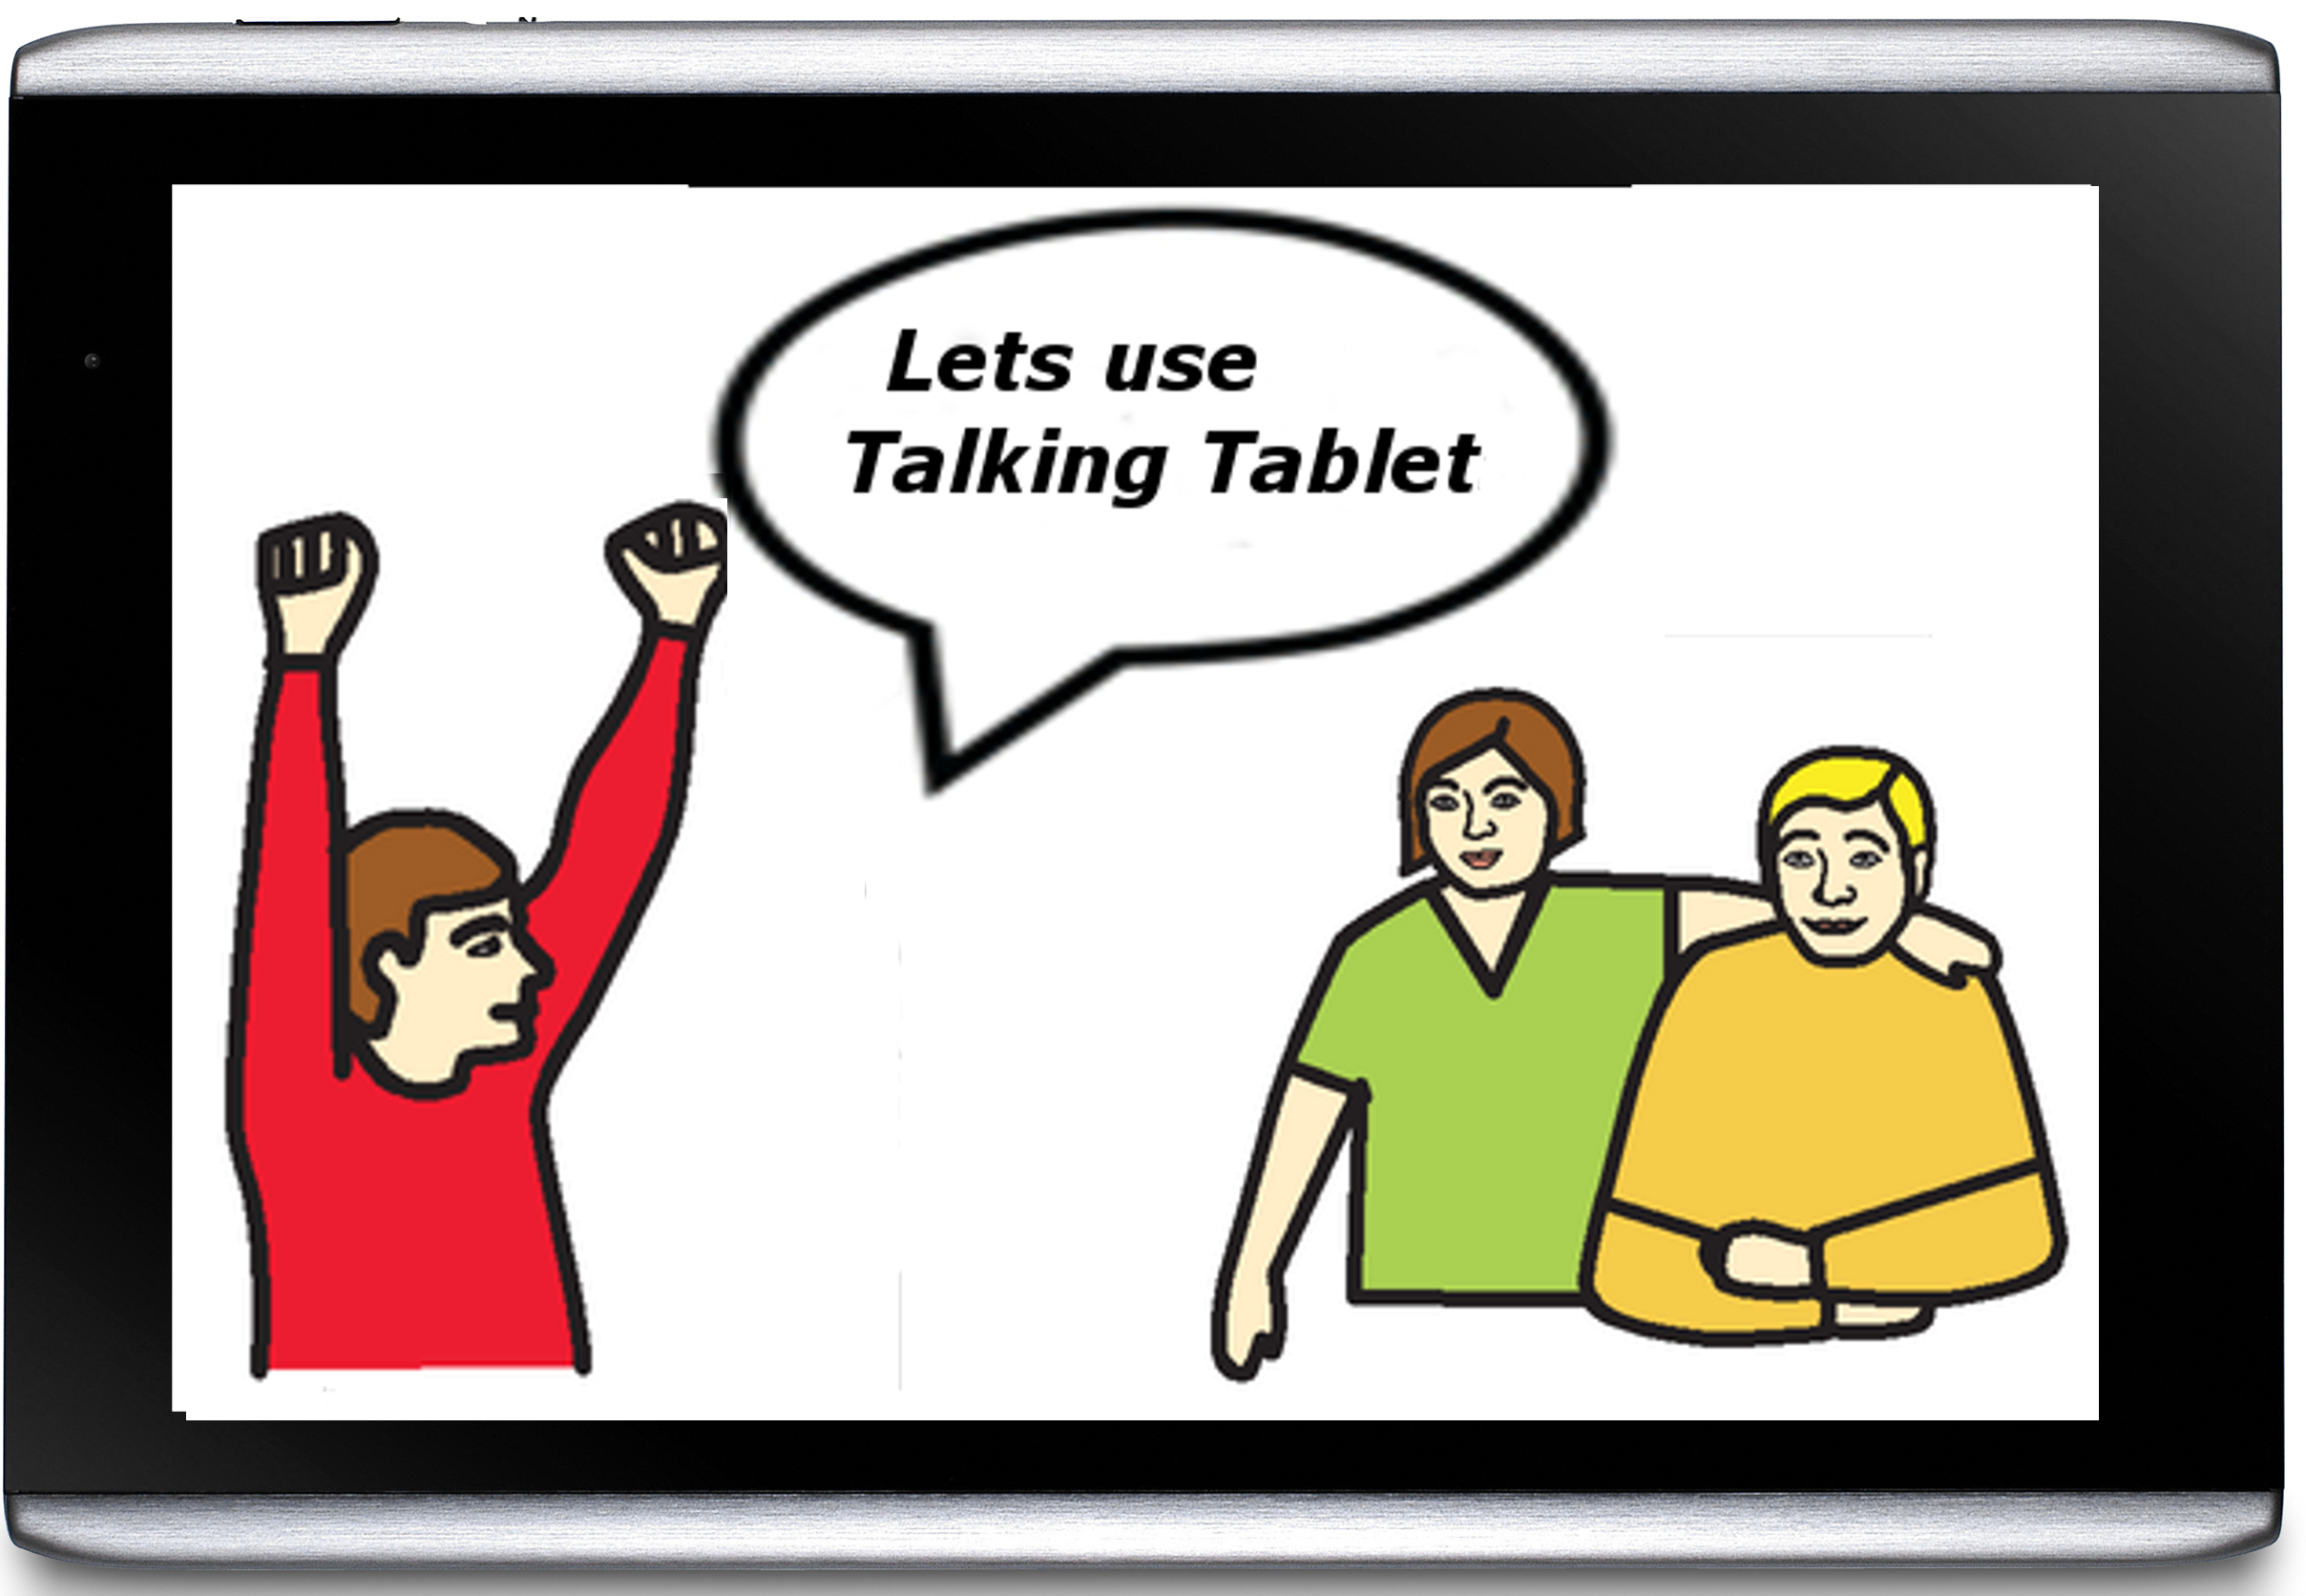 image of the talking tablet